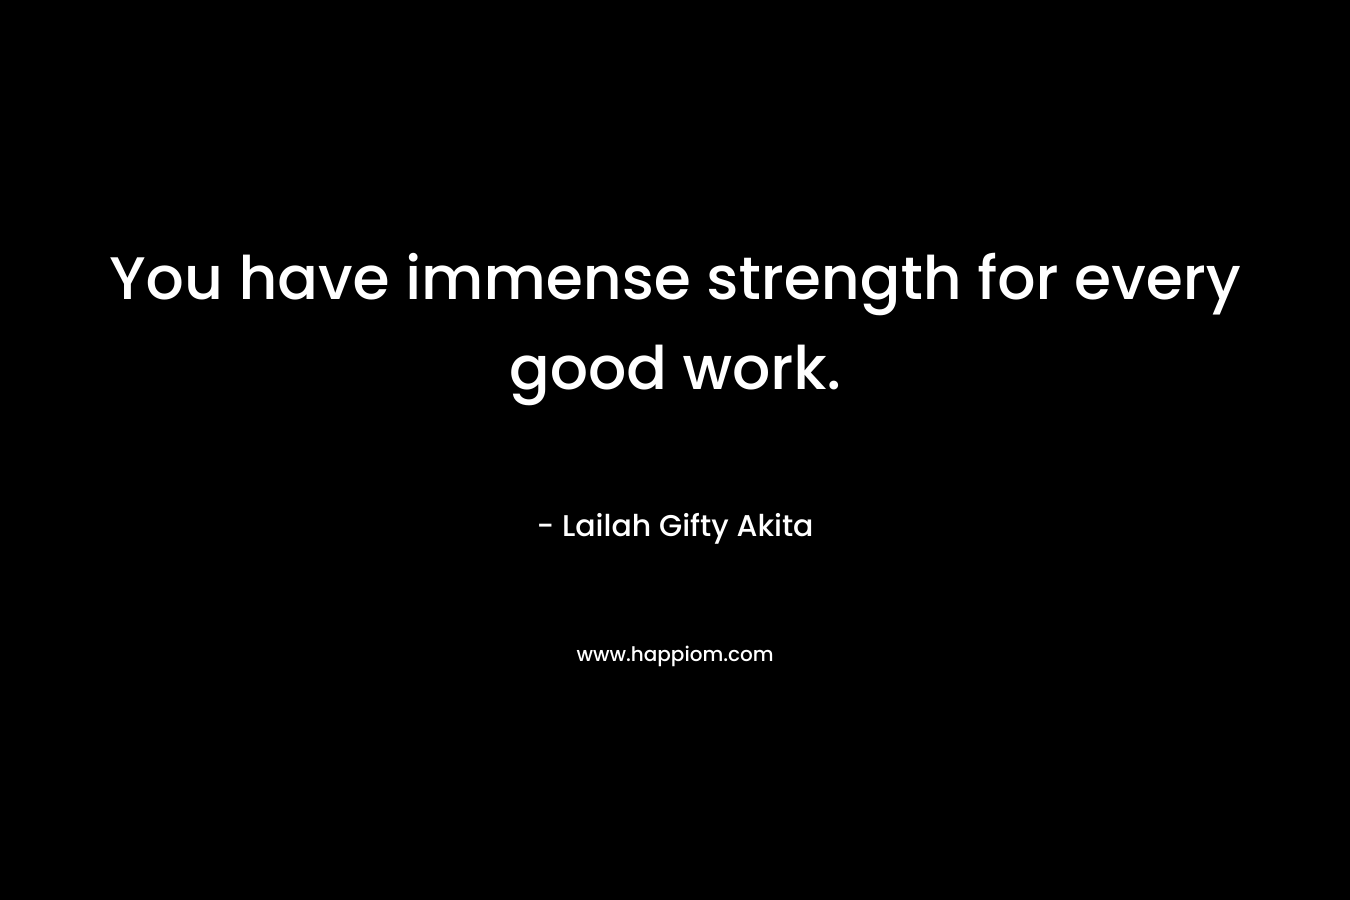 You have immense strength for every good work.